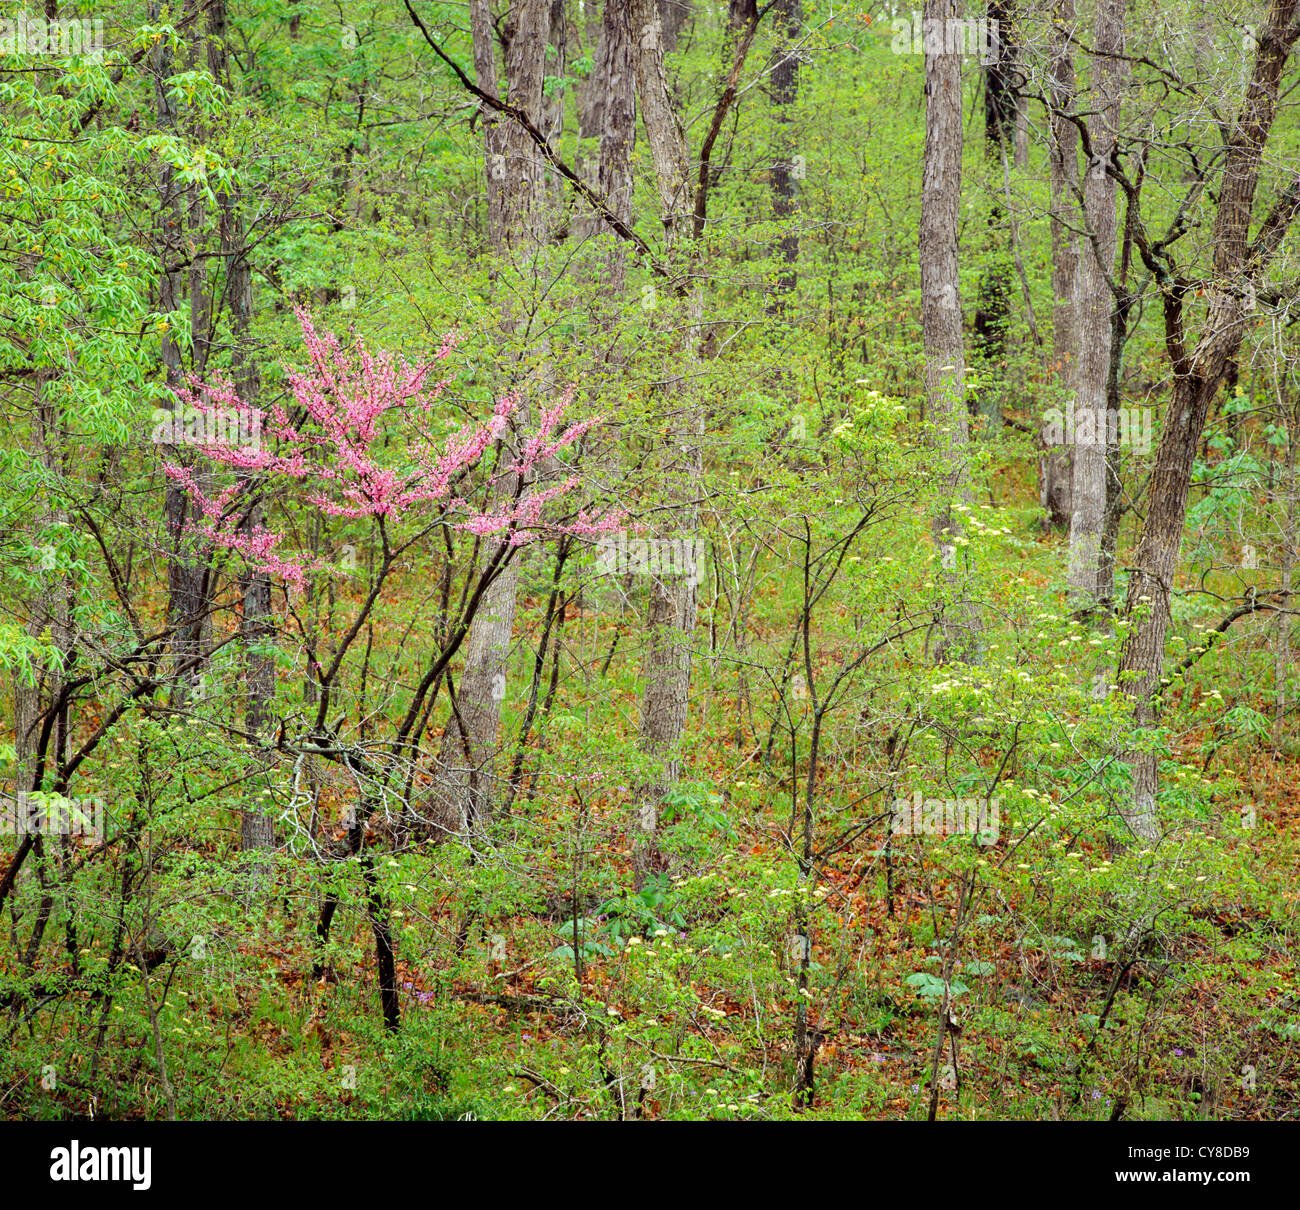 Eastern Redbud, Cercis canadensis, in deciduous forest Stock Photo